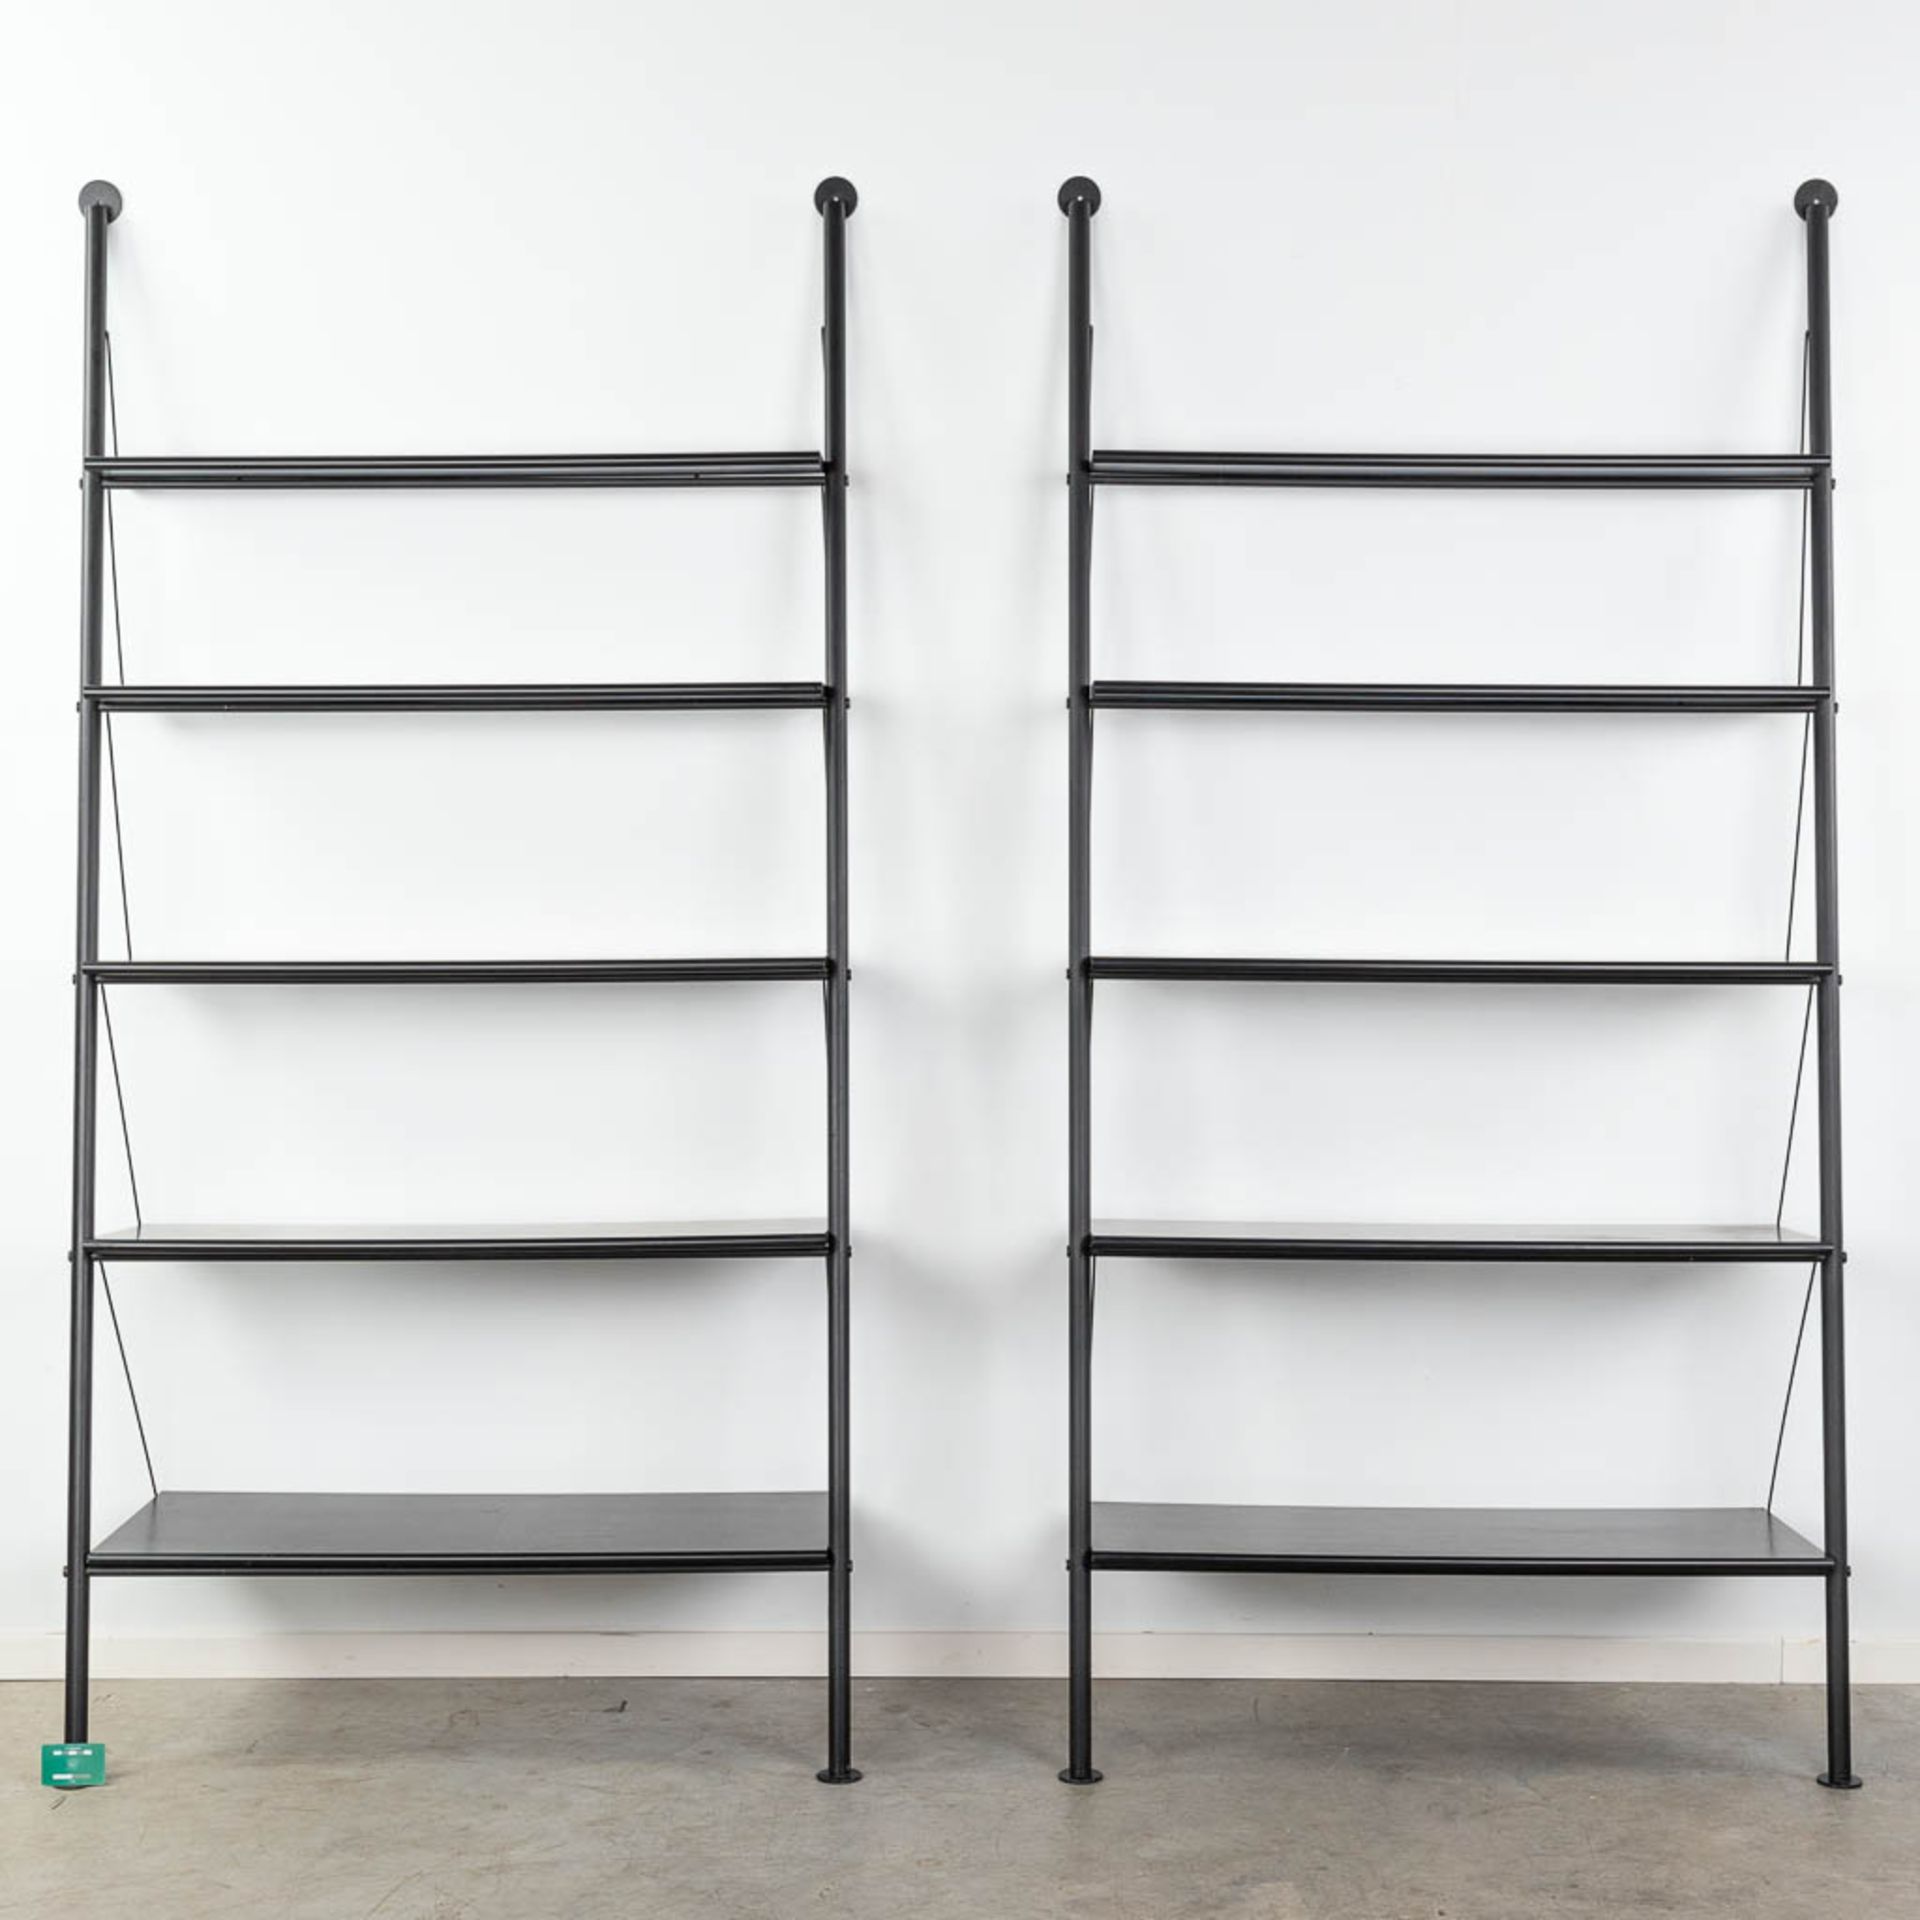 Philippe STARCK (1949) 'John LLD' two wall units, metal and wood. (D:50 x W:110 x H:218 cm) - Image 12 of 16